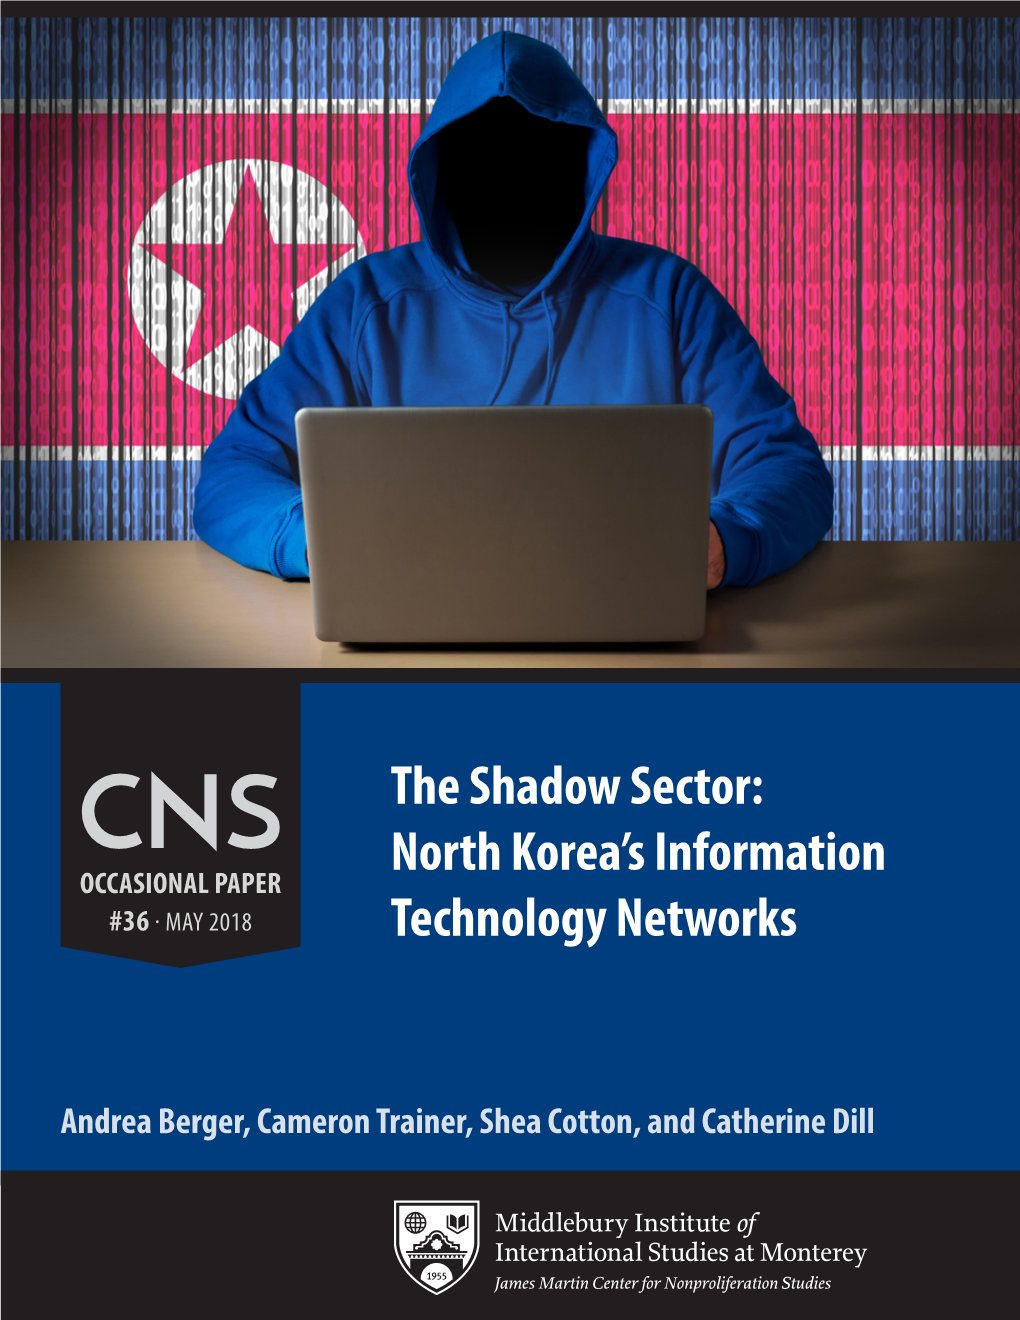 The Shadow Sector: North Korea's Information Technology Networks